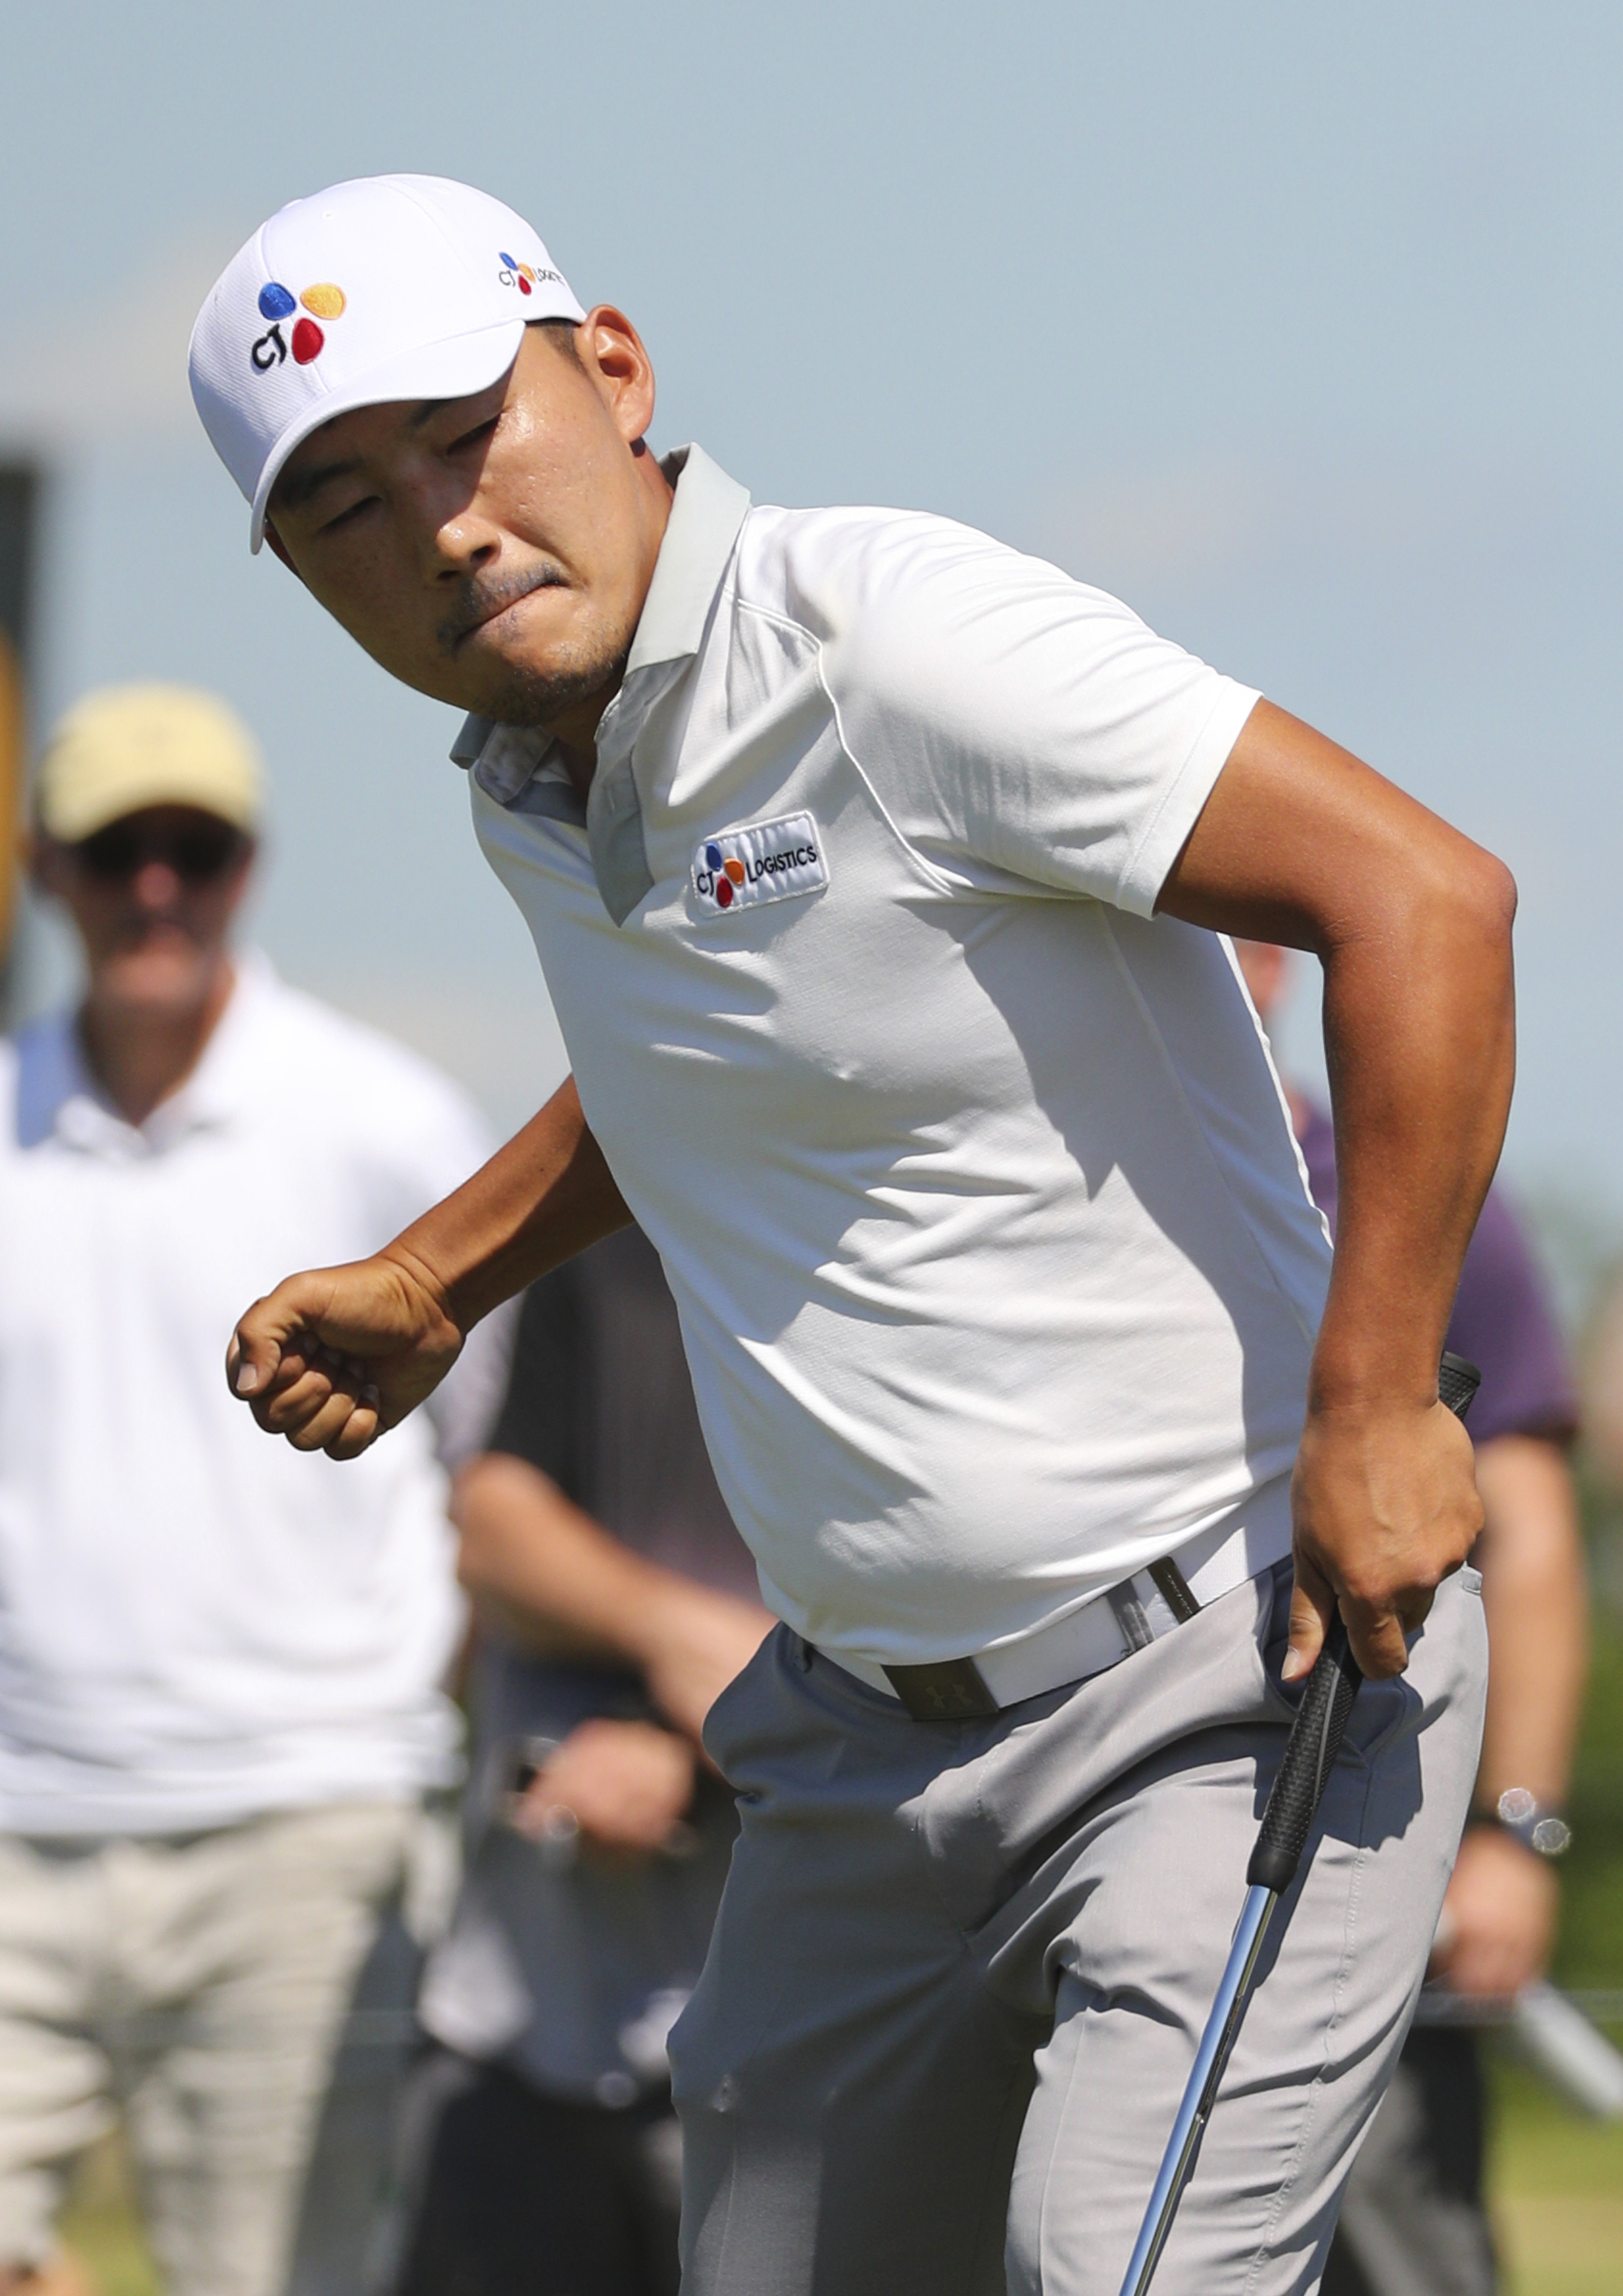 Sung Kang wins Byron Nelson for first PGA Tour title